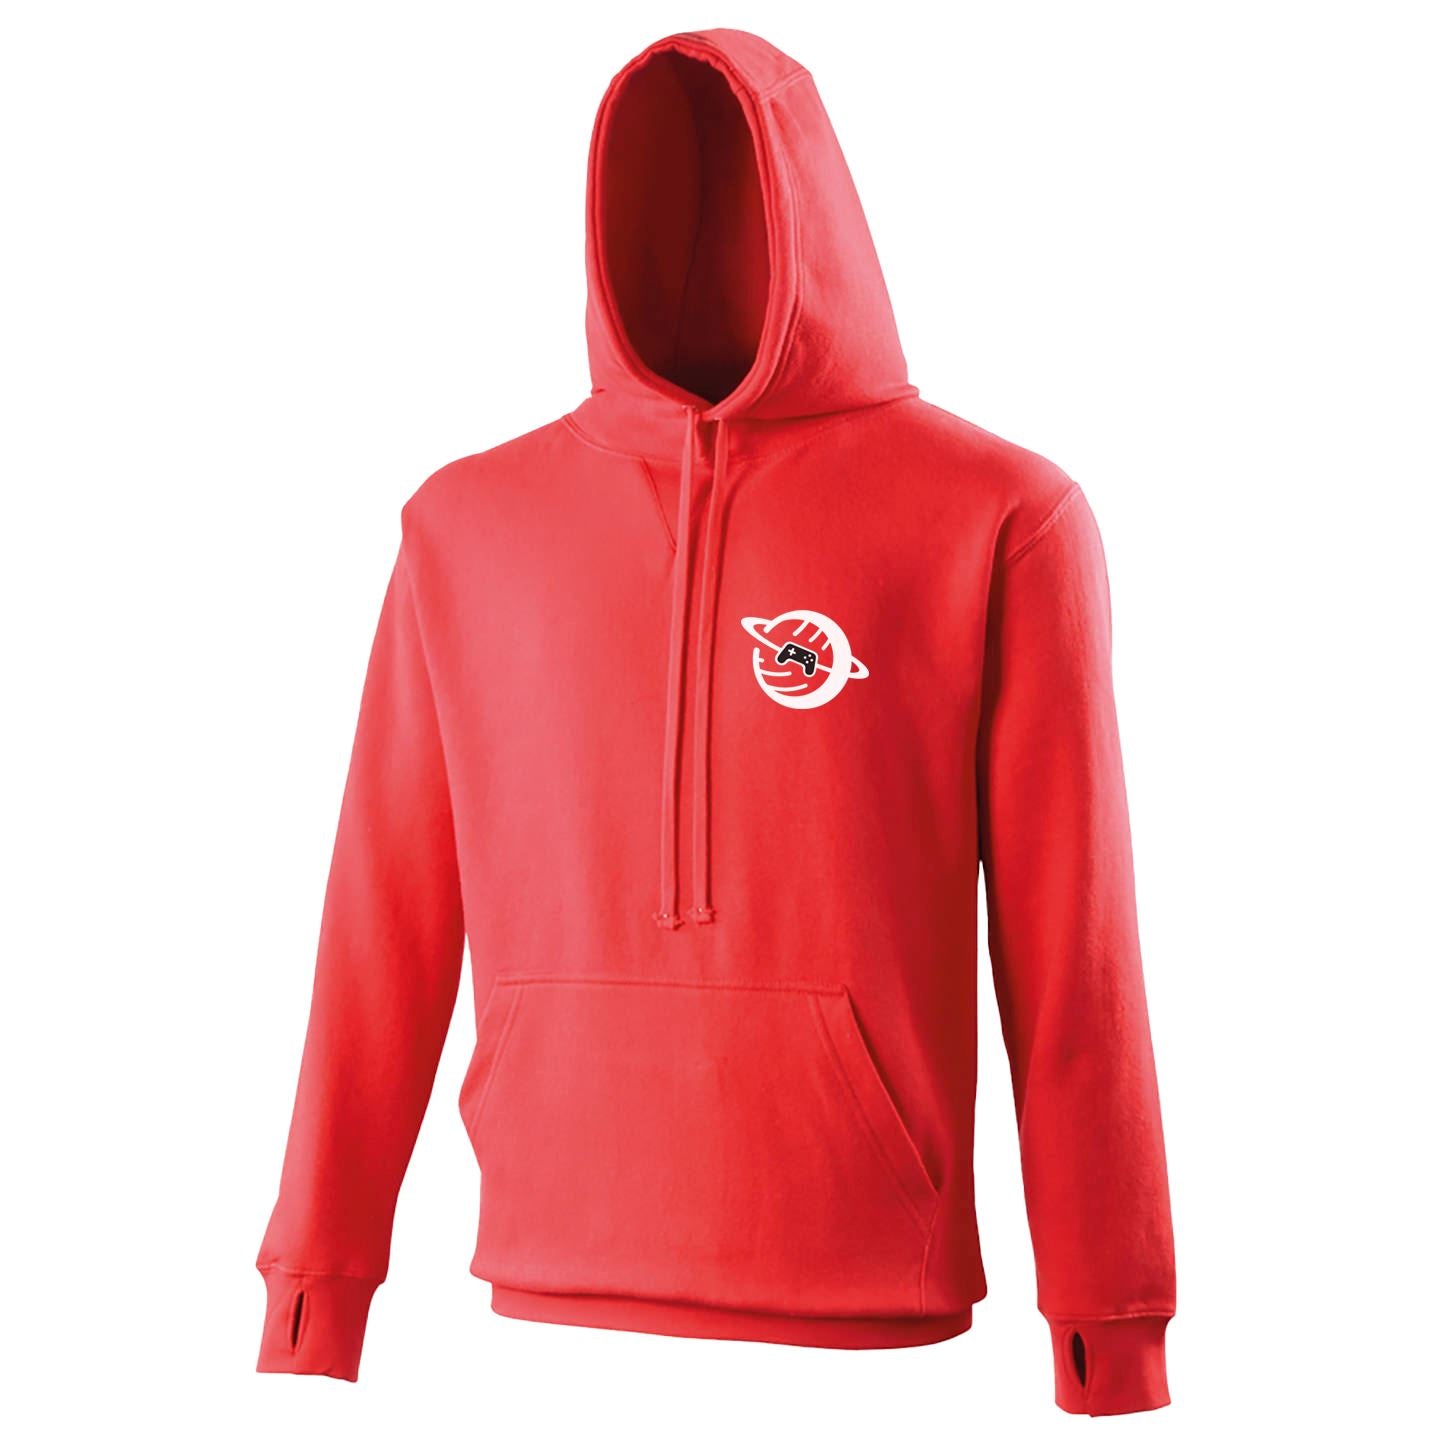 SIOW Official Charity Gaming Hoodie Hoodie Seven Squared Small 36" Chest Red 